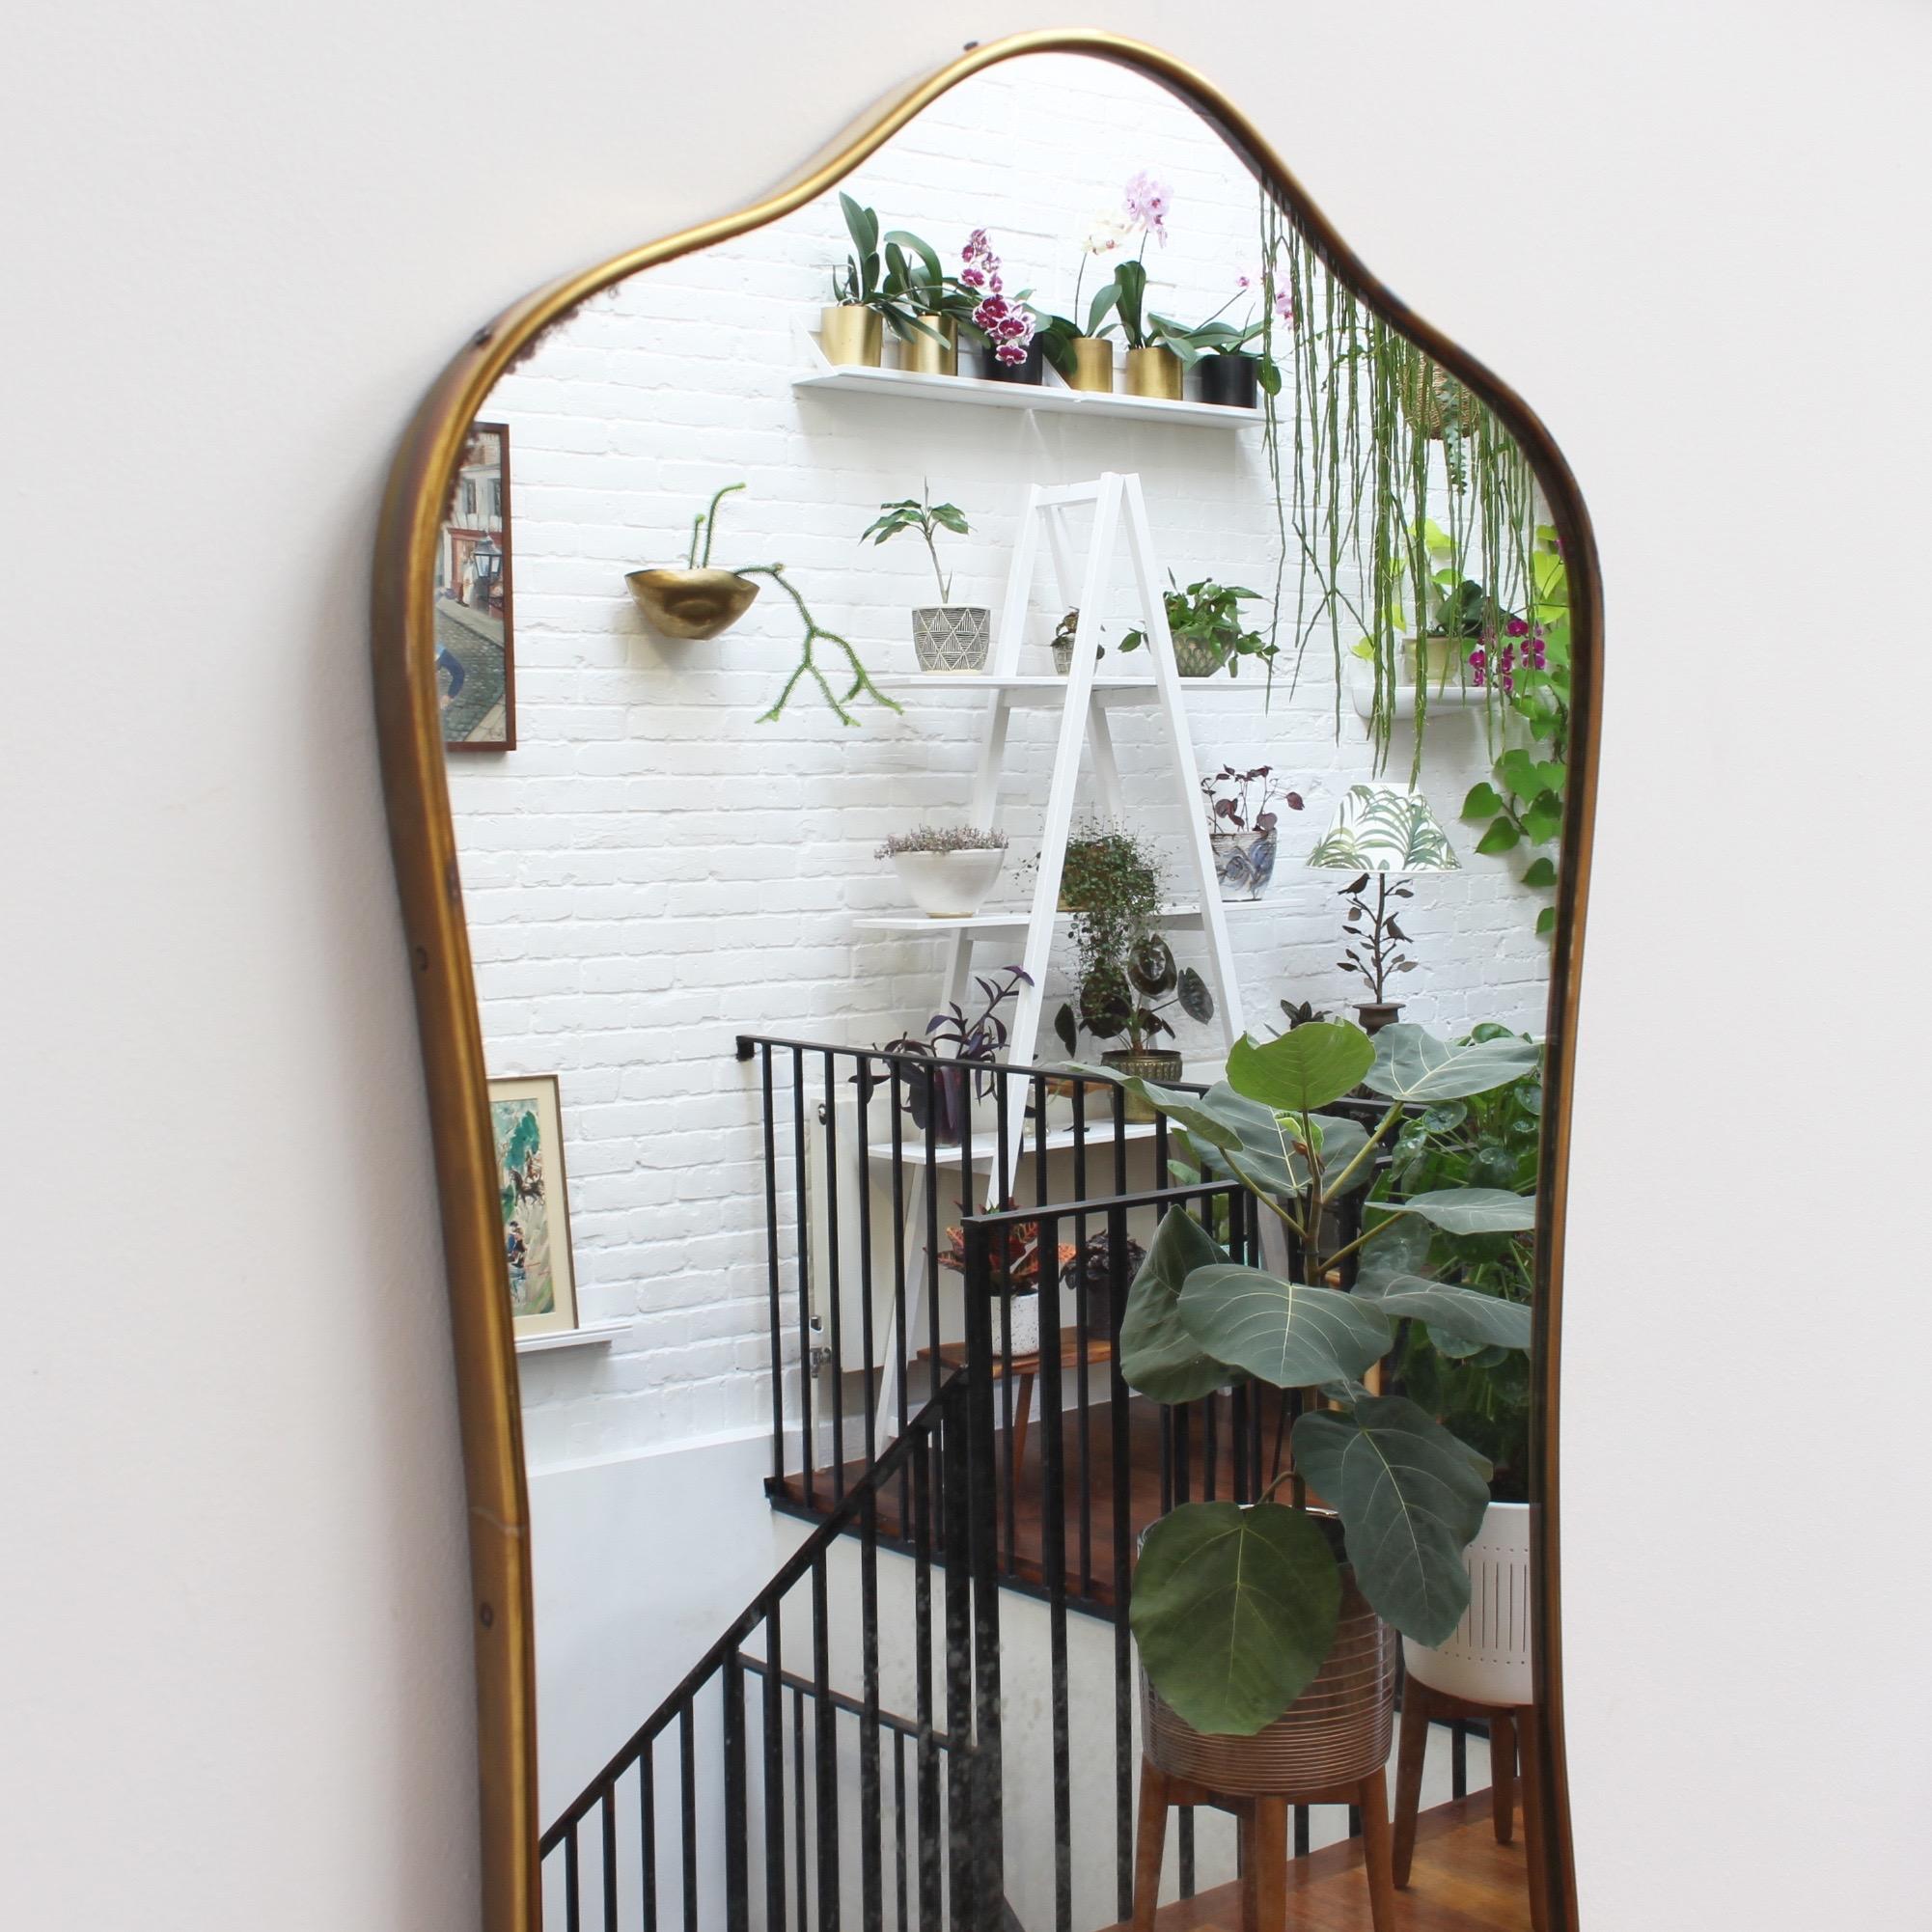 Midcentury Italian wall mirror with brass frame, circa 1950s. The mirror is classically-shaped - very elegant and distinctive in a modern Gio Ponti style. This mirror is in good vintage condition. There are some evident but characterful blemishes on